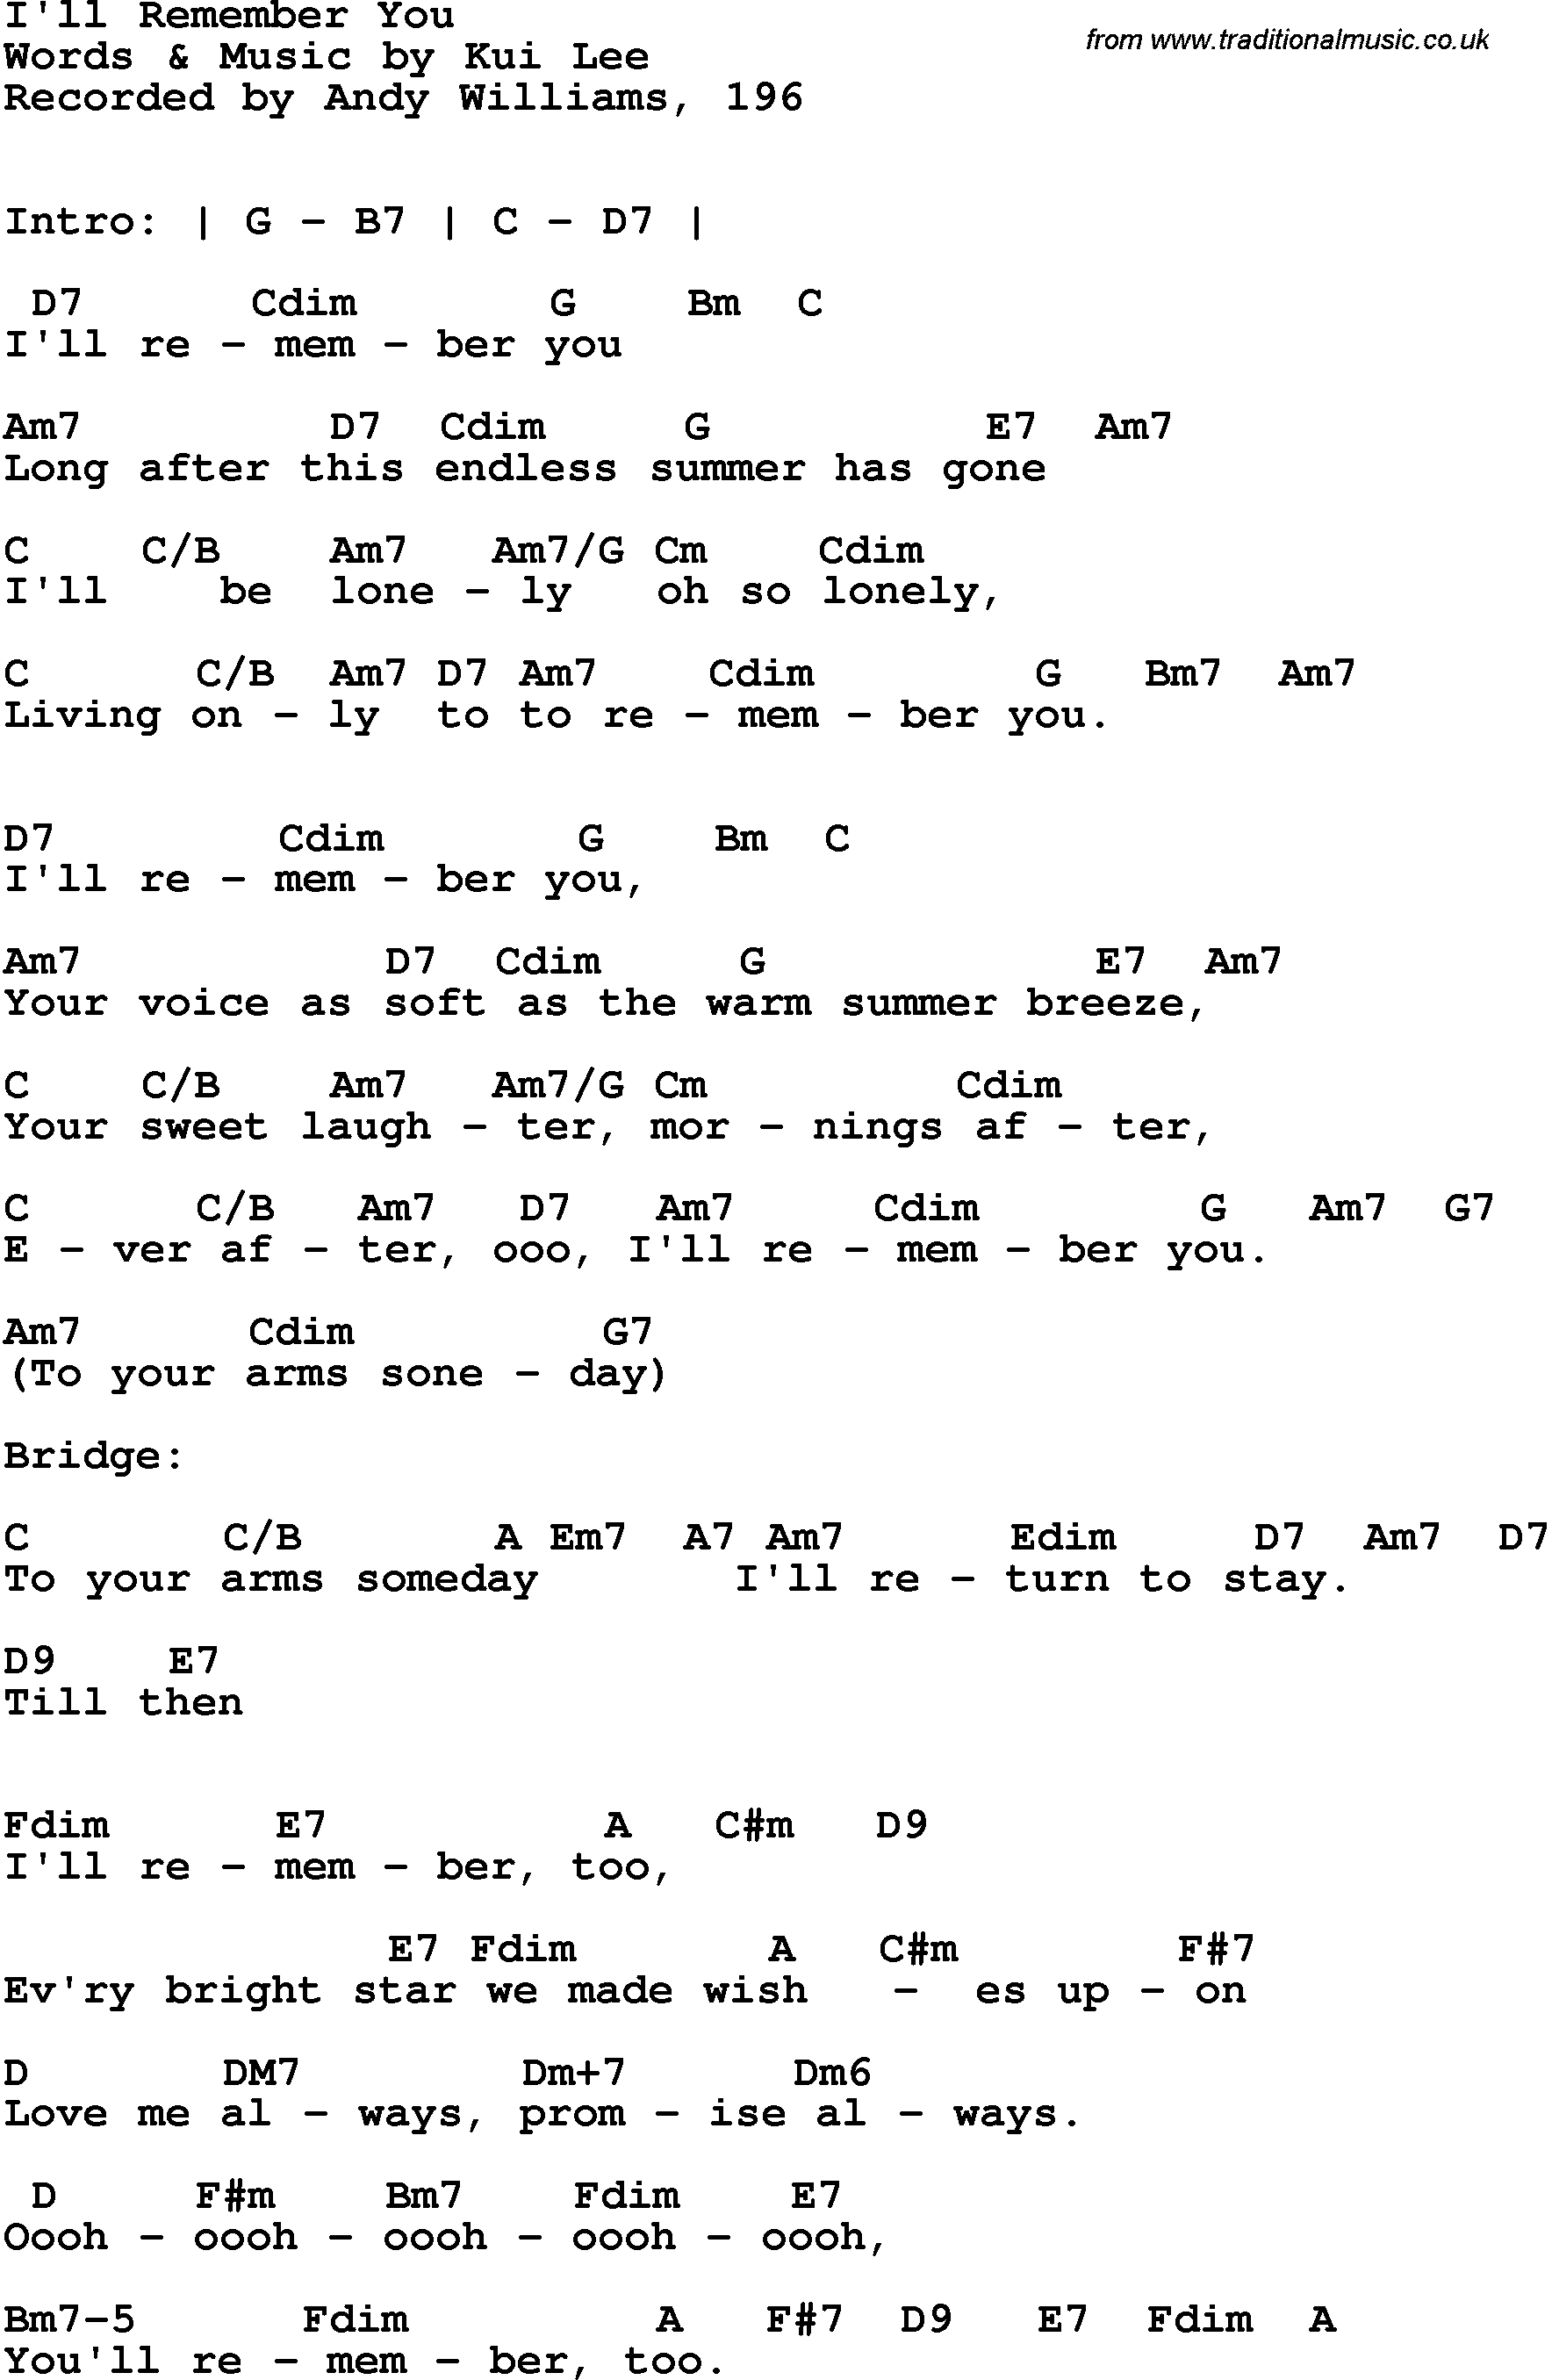 Song Lyrics with guitar chords for I'll Remember You - Andy Williams, 1966